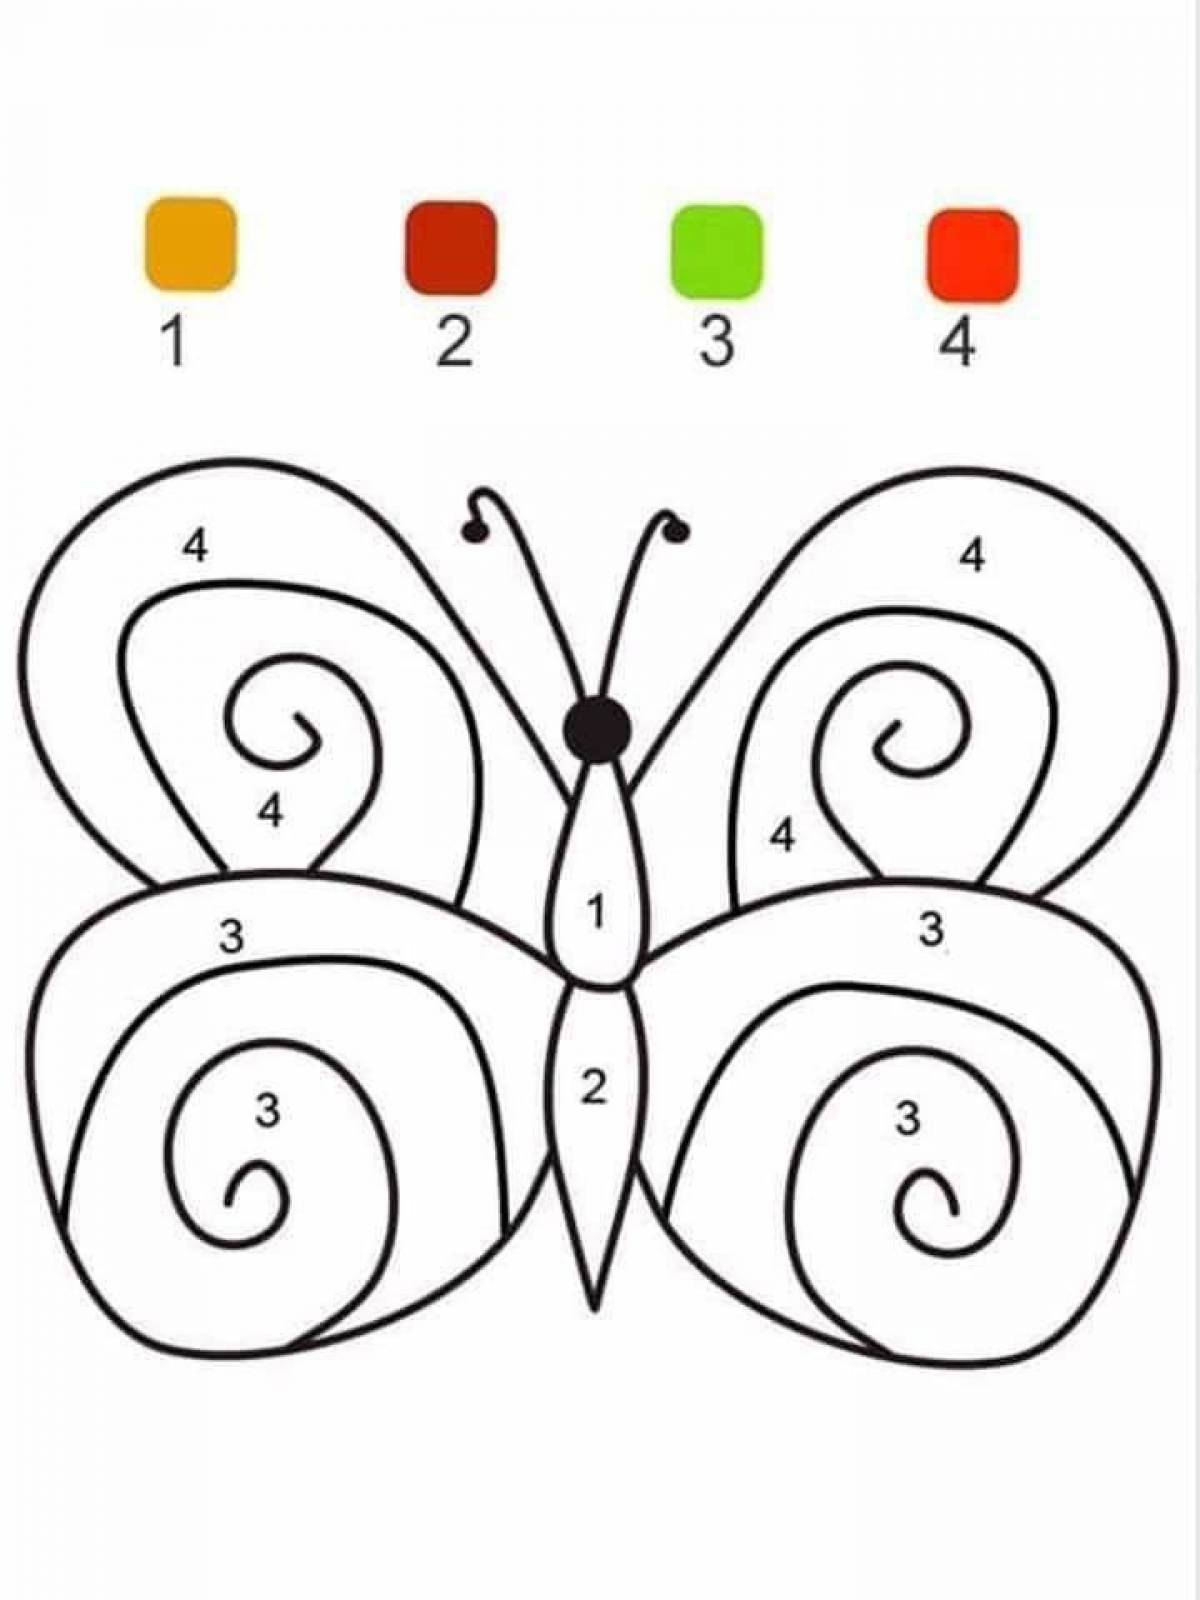 Fun coloring by numbers for kids